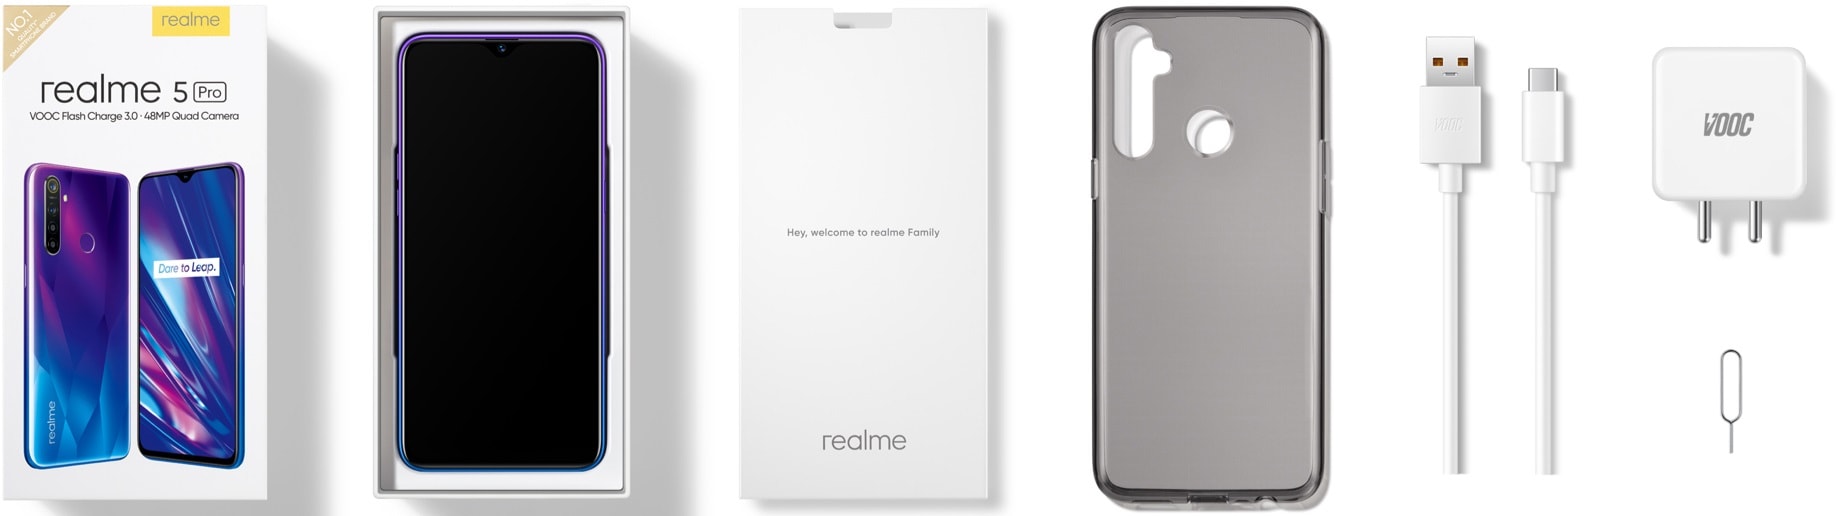 Realme has Launched Quad Camera Series Phones, Price Starting from 9,999-Realme 5 pro-features-prices-offers-in the box-unbox-price-release date-techinfoBiT